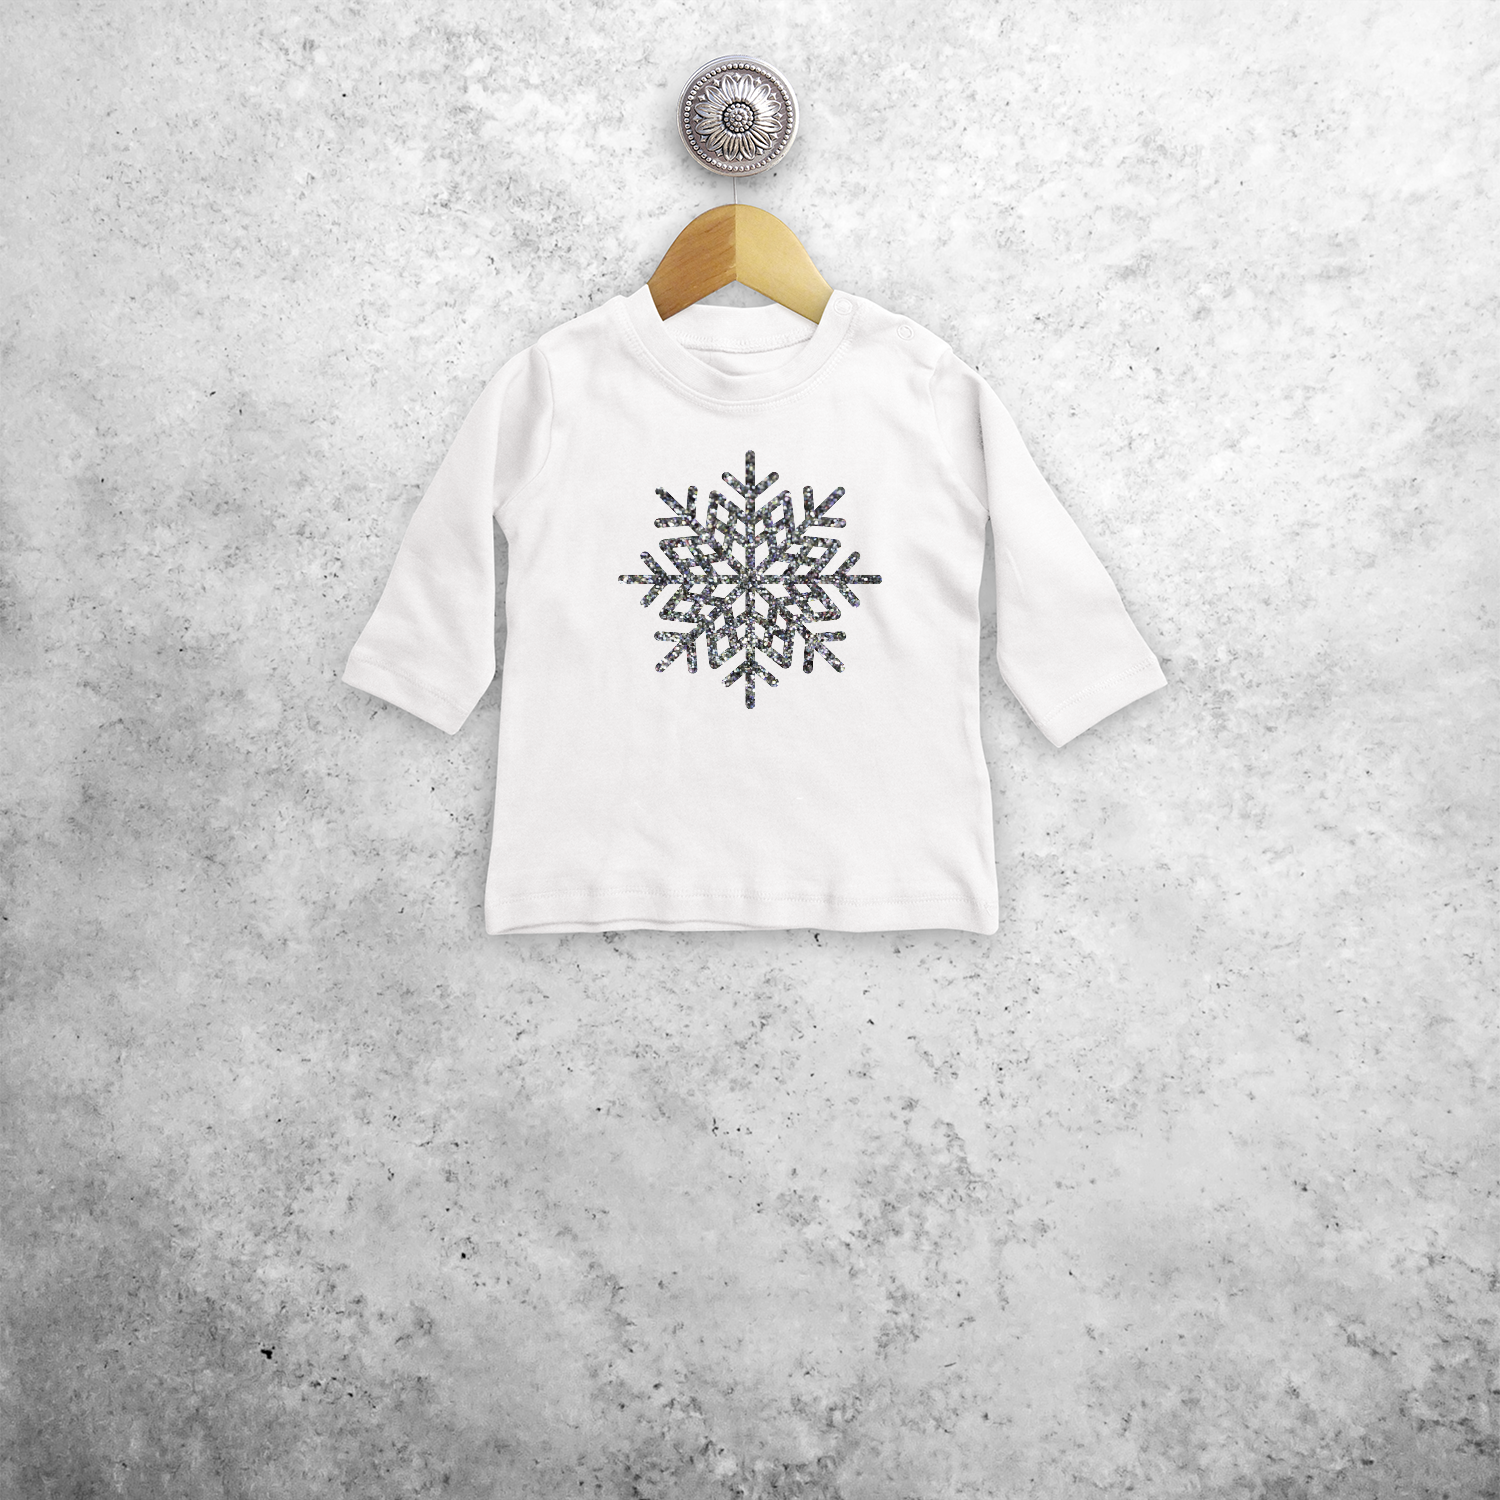 Baby or toddler shirt with long sleeves, with glitter snow star print by KMLeon.